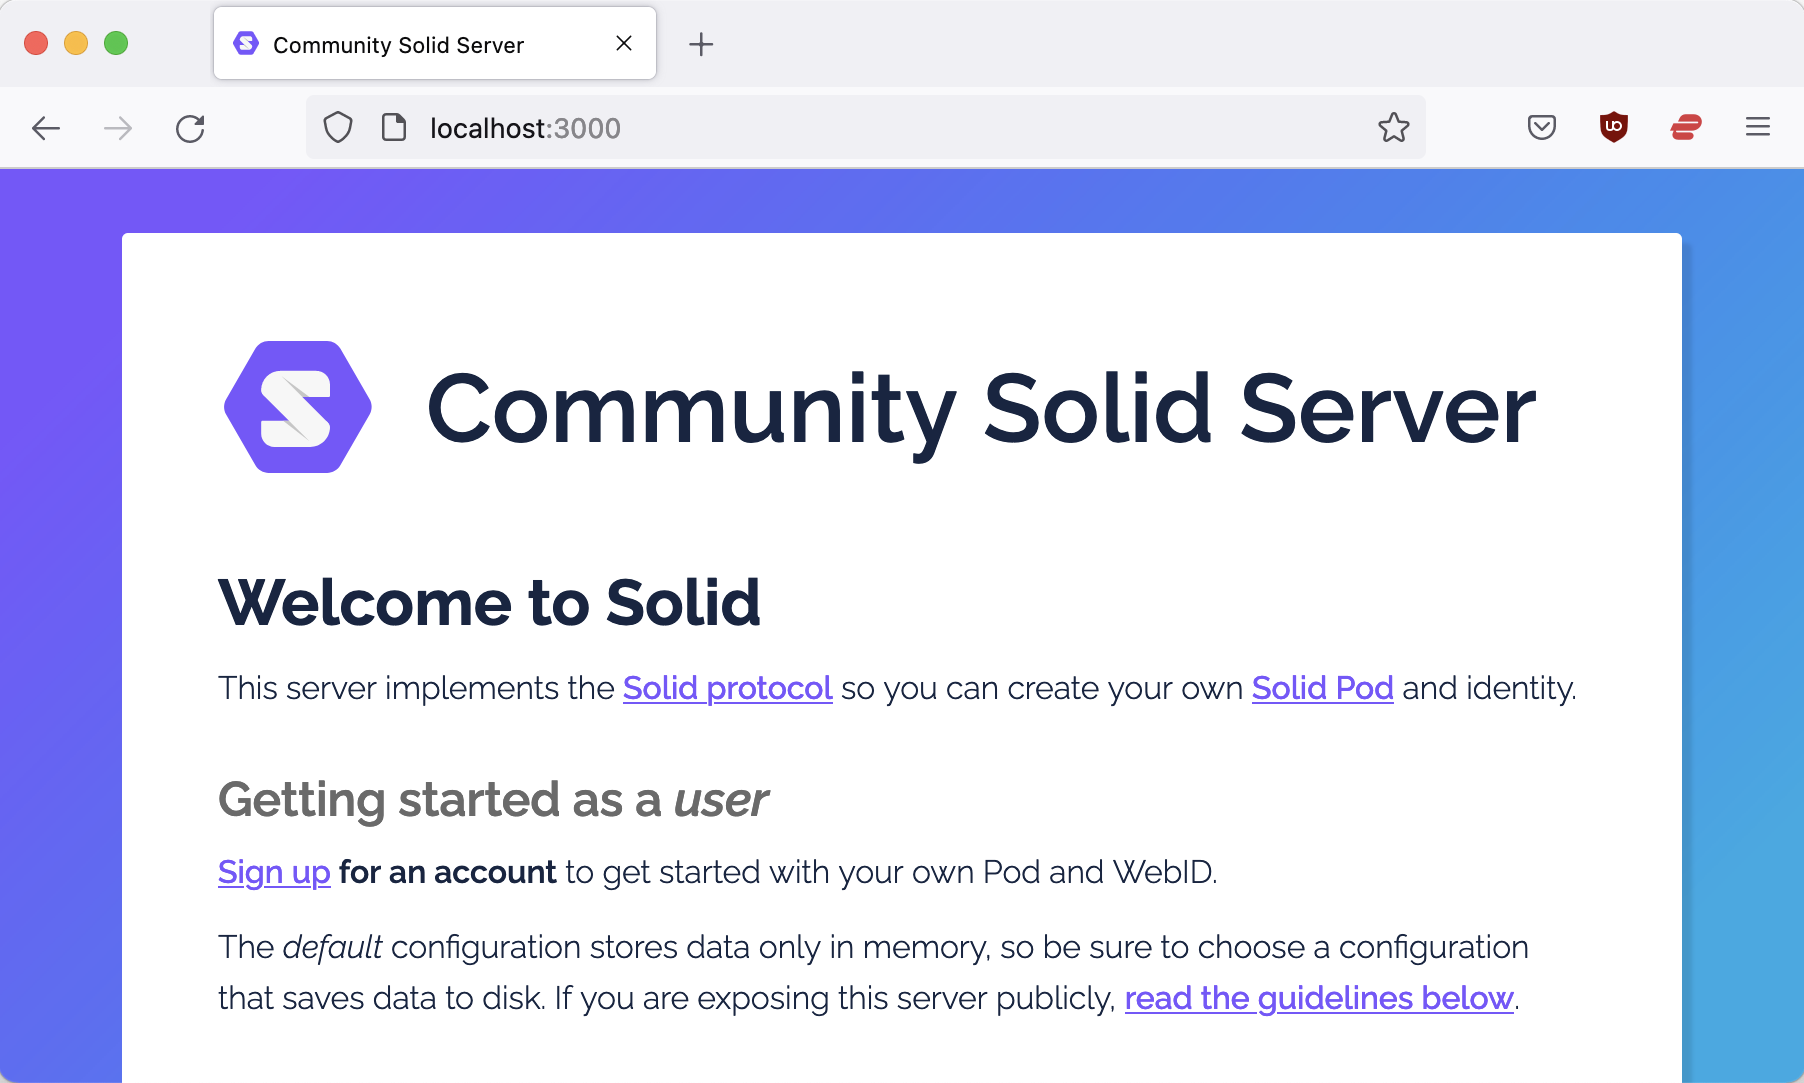 Community Solid Server welcome page